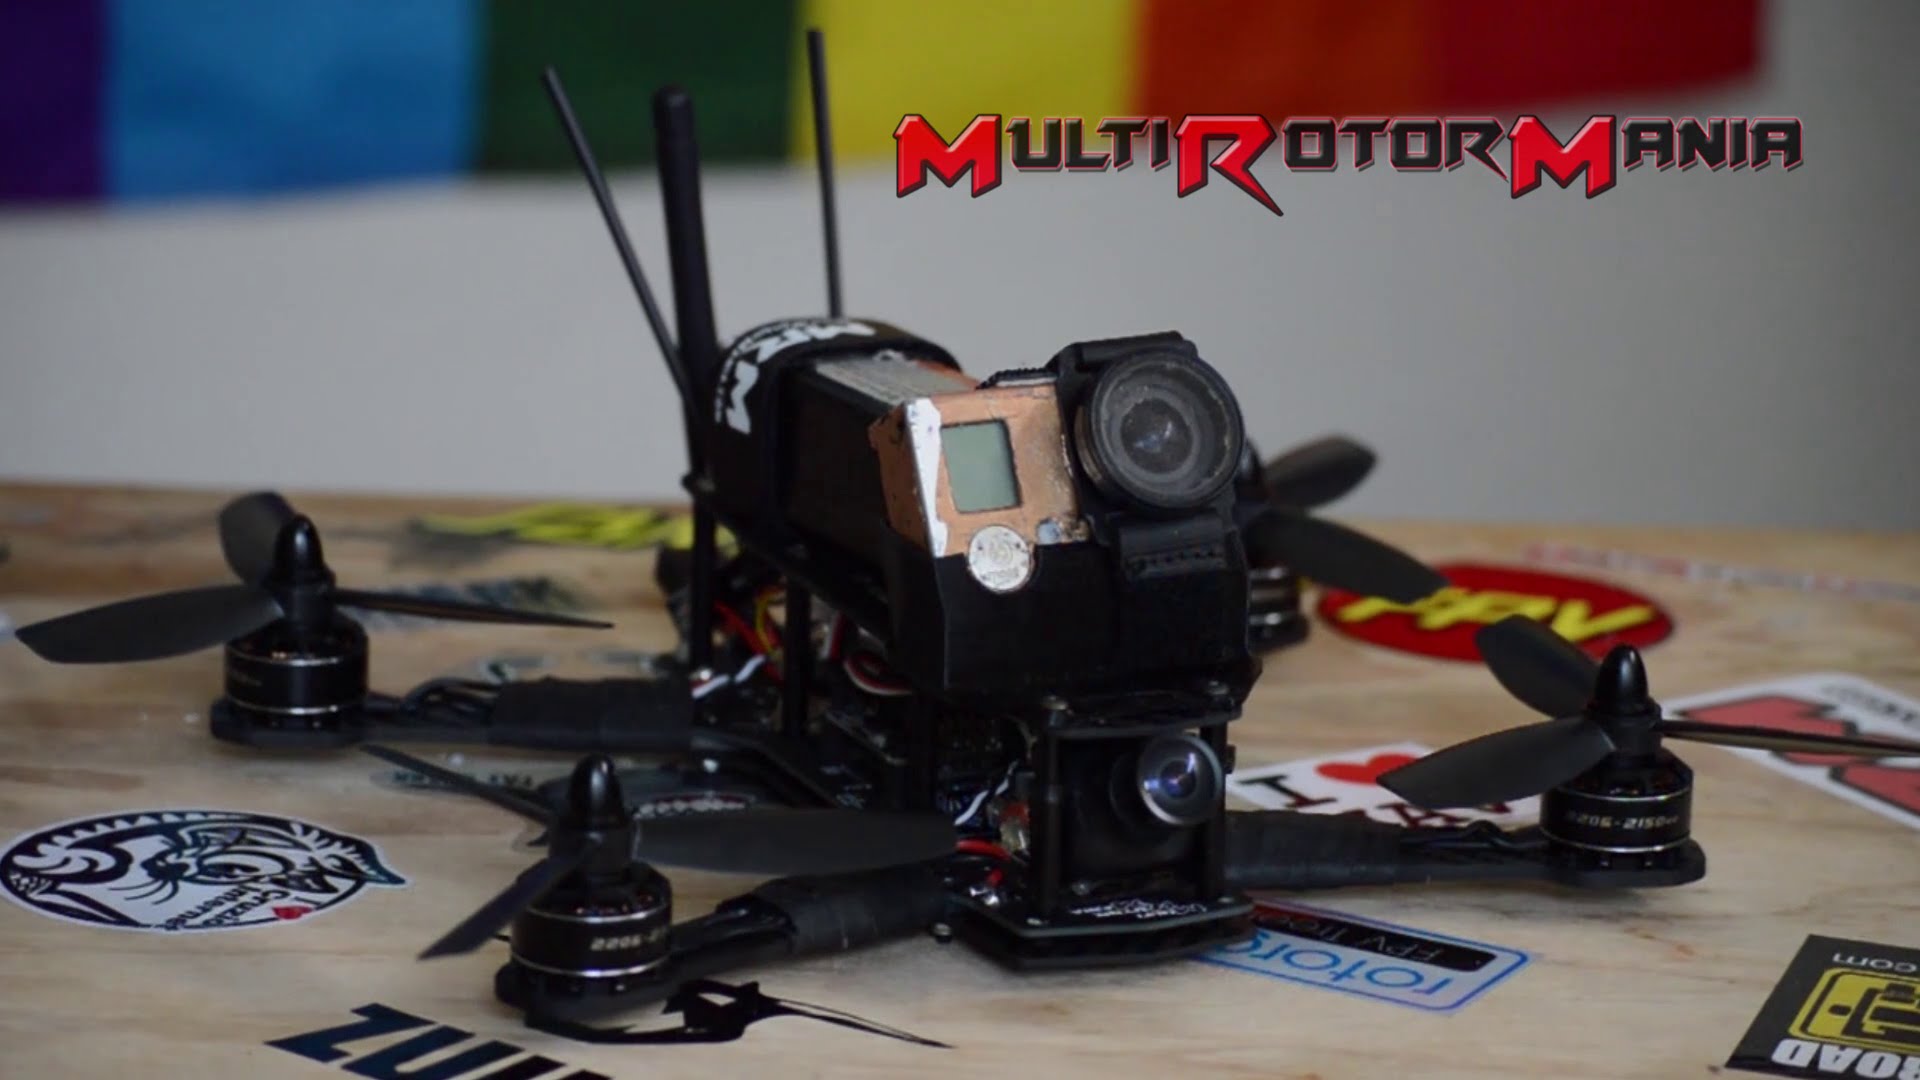 Let’s Build Multirotor Mania’s OSO 250 “Race Edition”